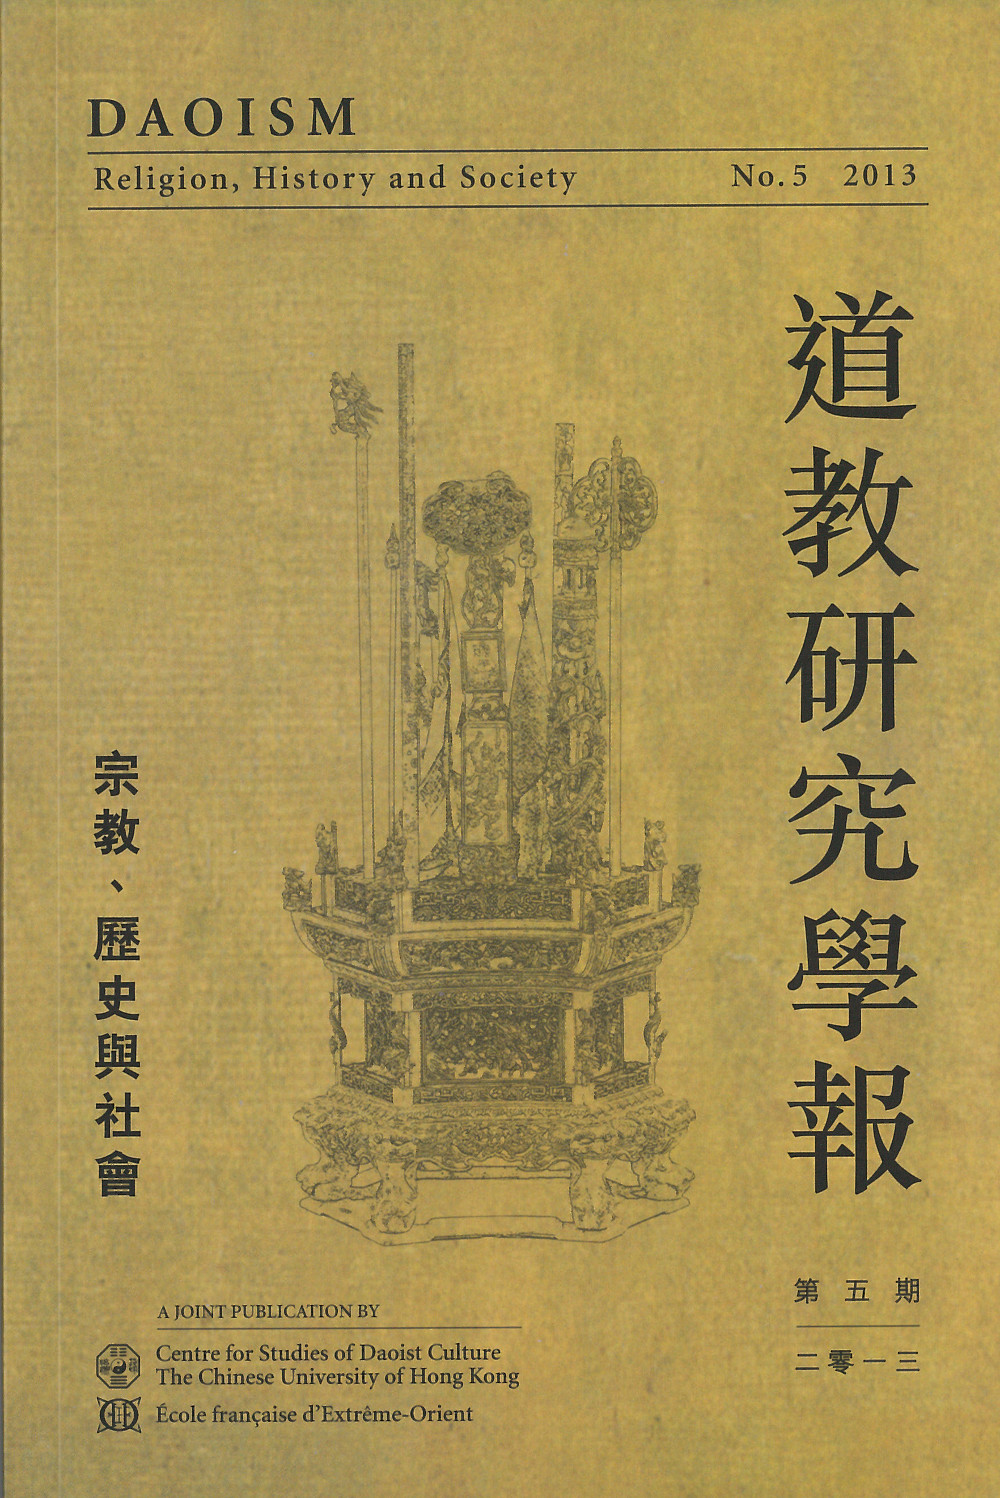 Daoism: Religion, History and Society 5 (2013)